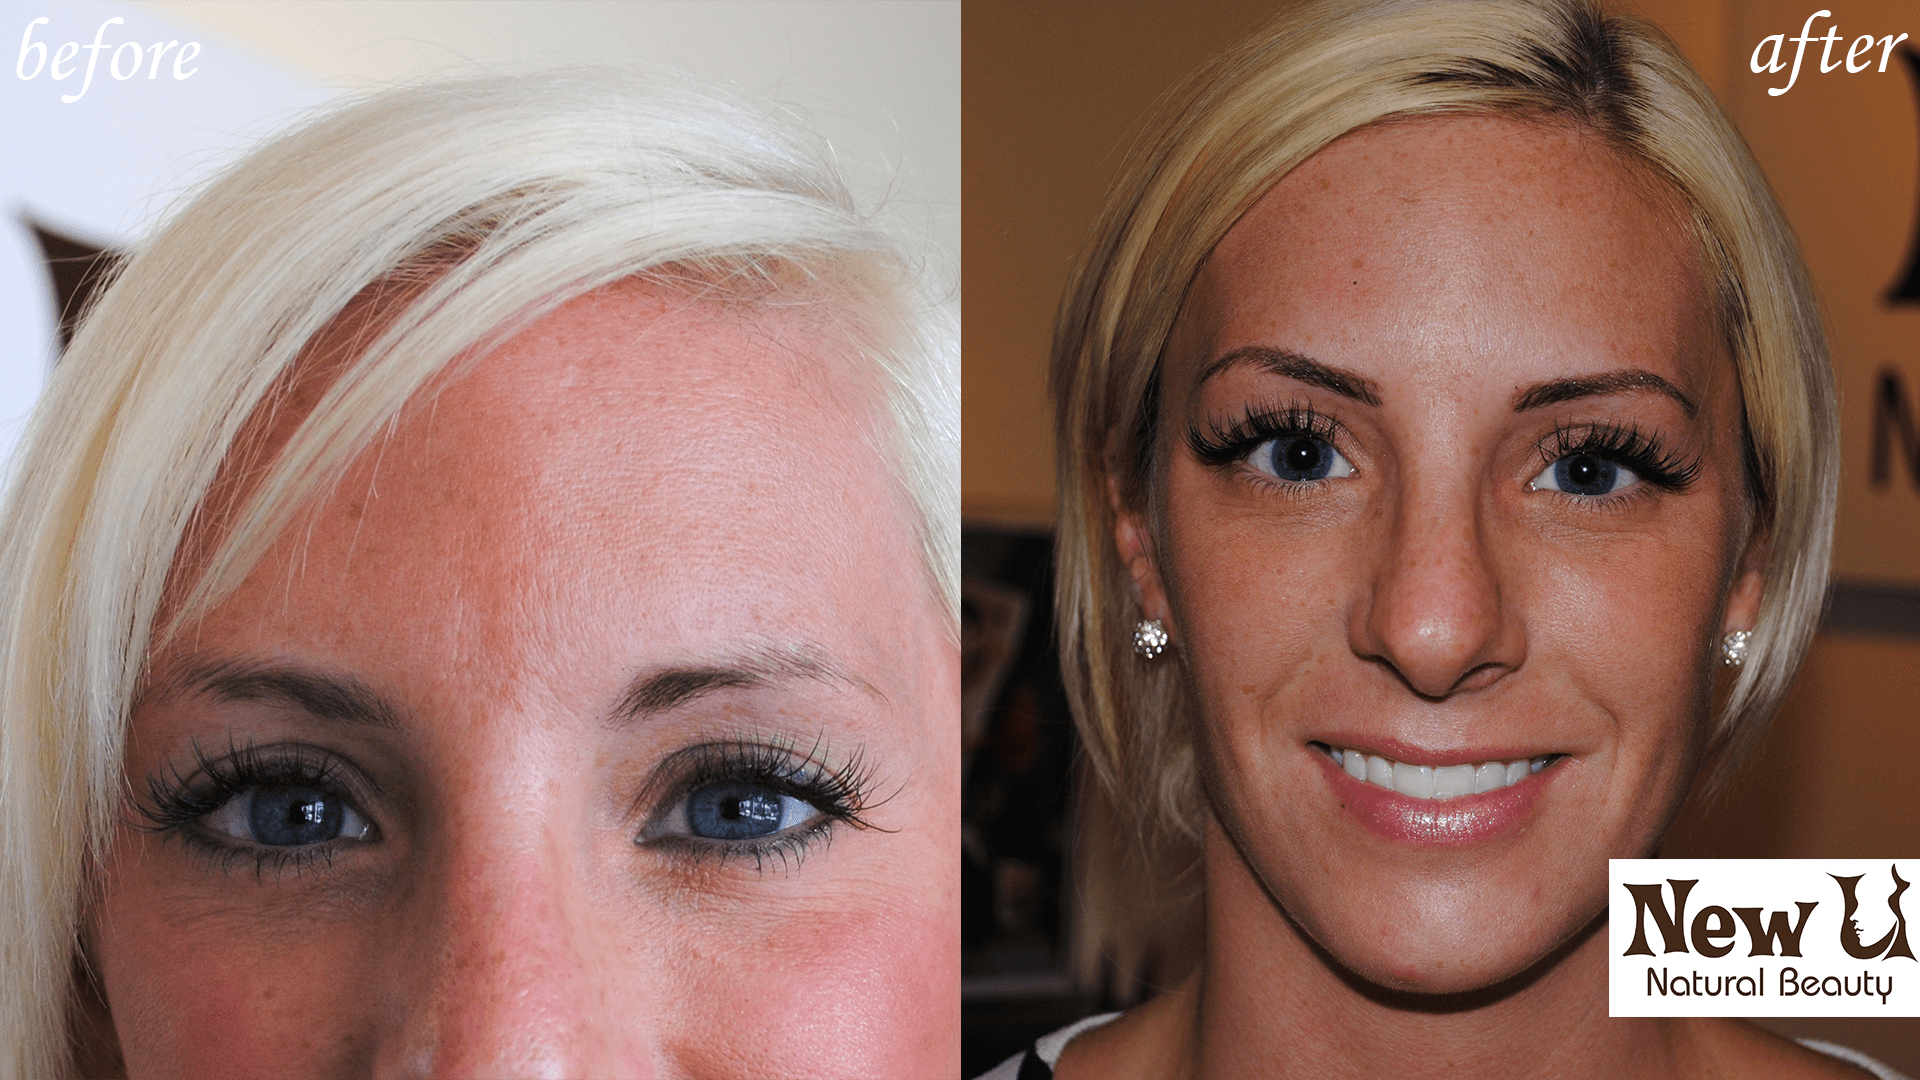 Permanent Makeup 1 Las Vegas Before and After